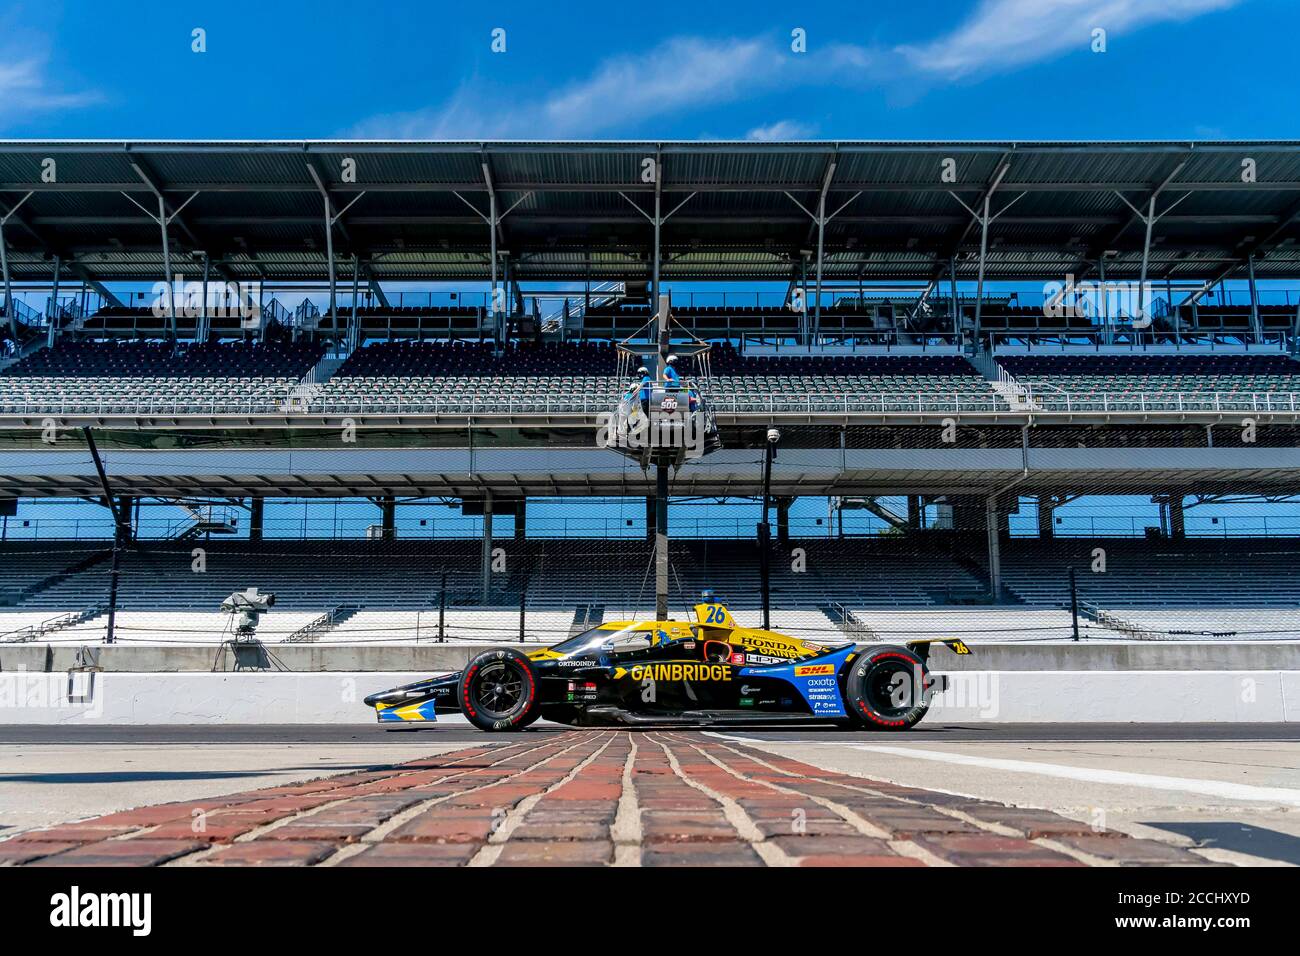 Indianapolis, Indiana, USA. 21st Aug, 2020. ZACH VEACH (26) of the United States practices for the Indianapolis 500 at the Indianapolis Motor Speedway in Indianapolis, Indiana. Credit: Walter G Arce Sr Grindstone Medi/ASP/ZUMA Wire/Alamy Live News Stock Photo